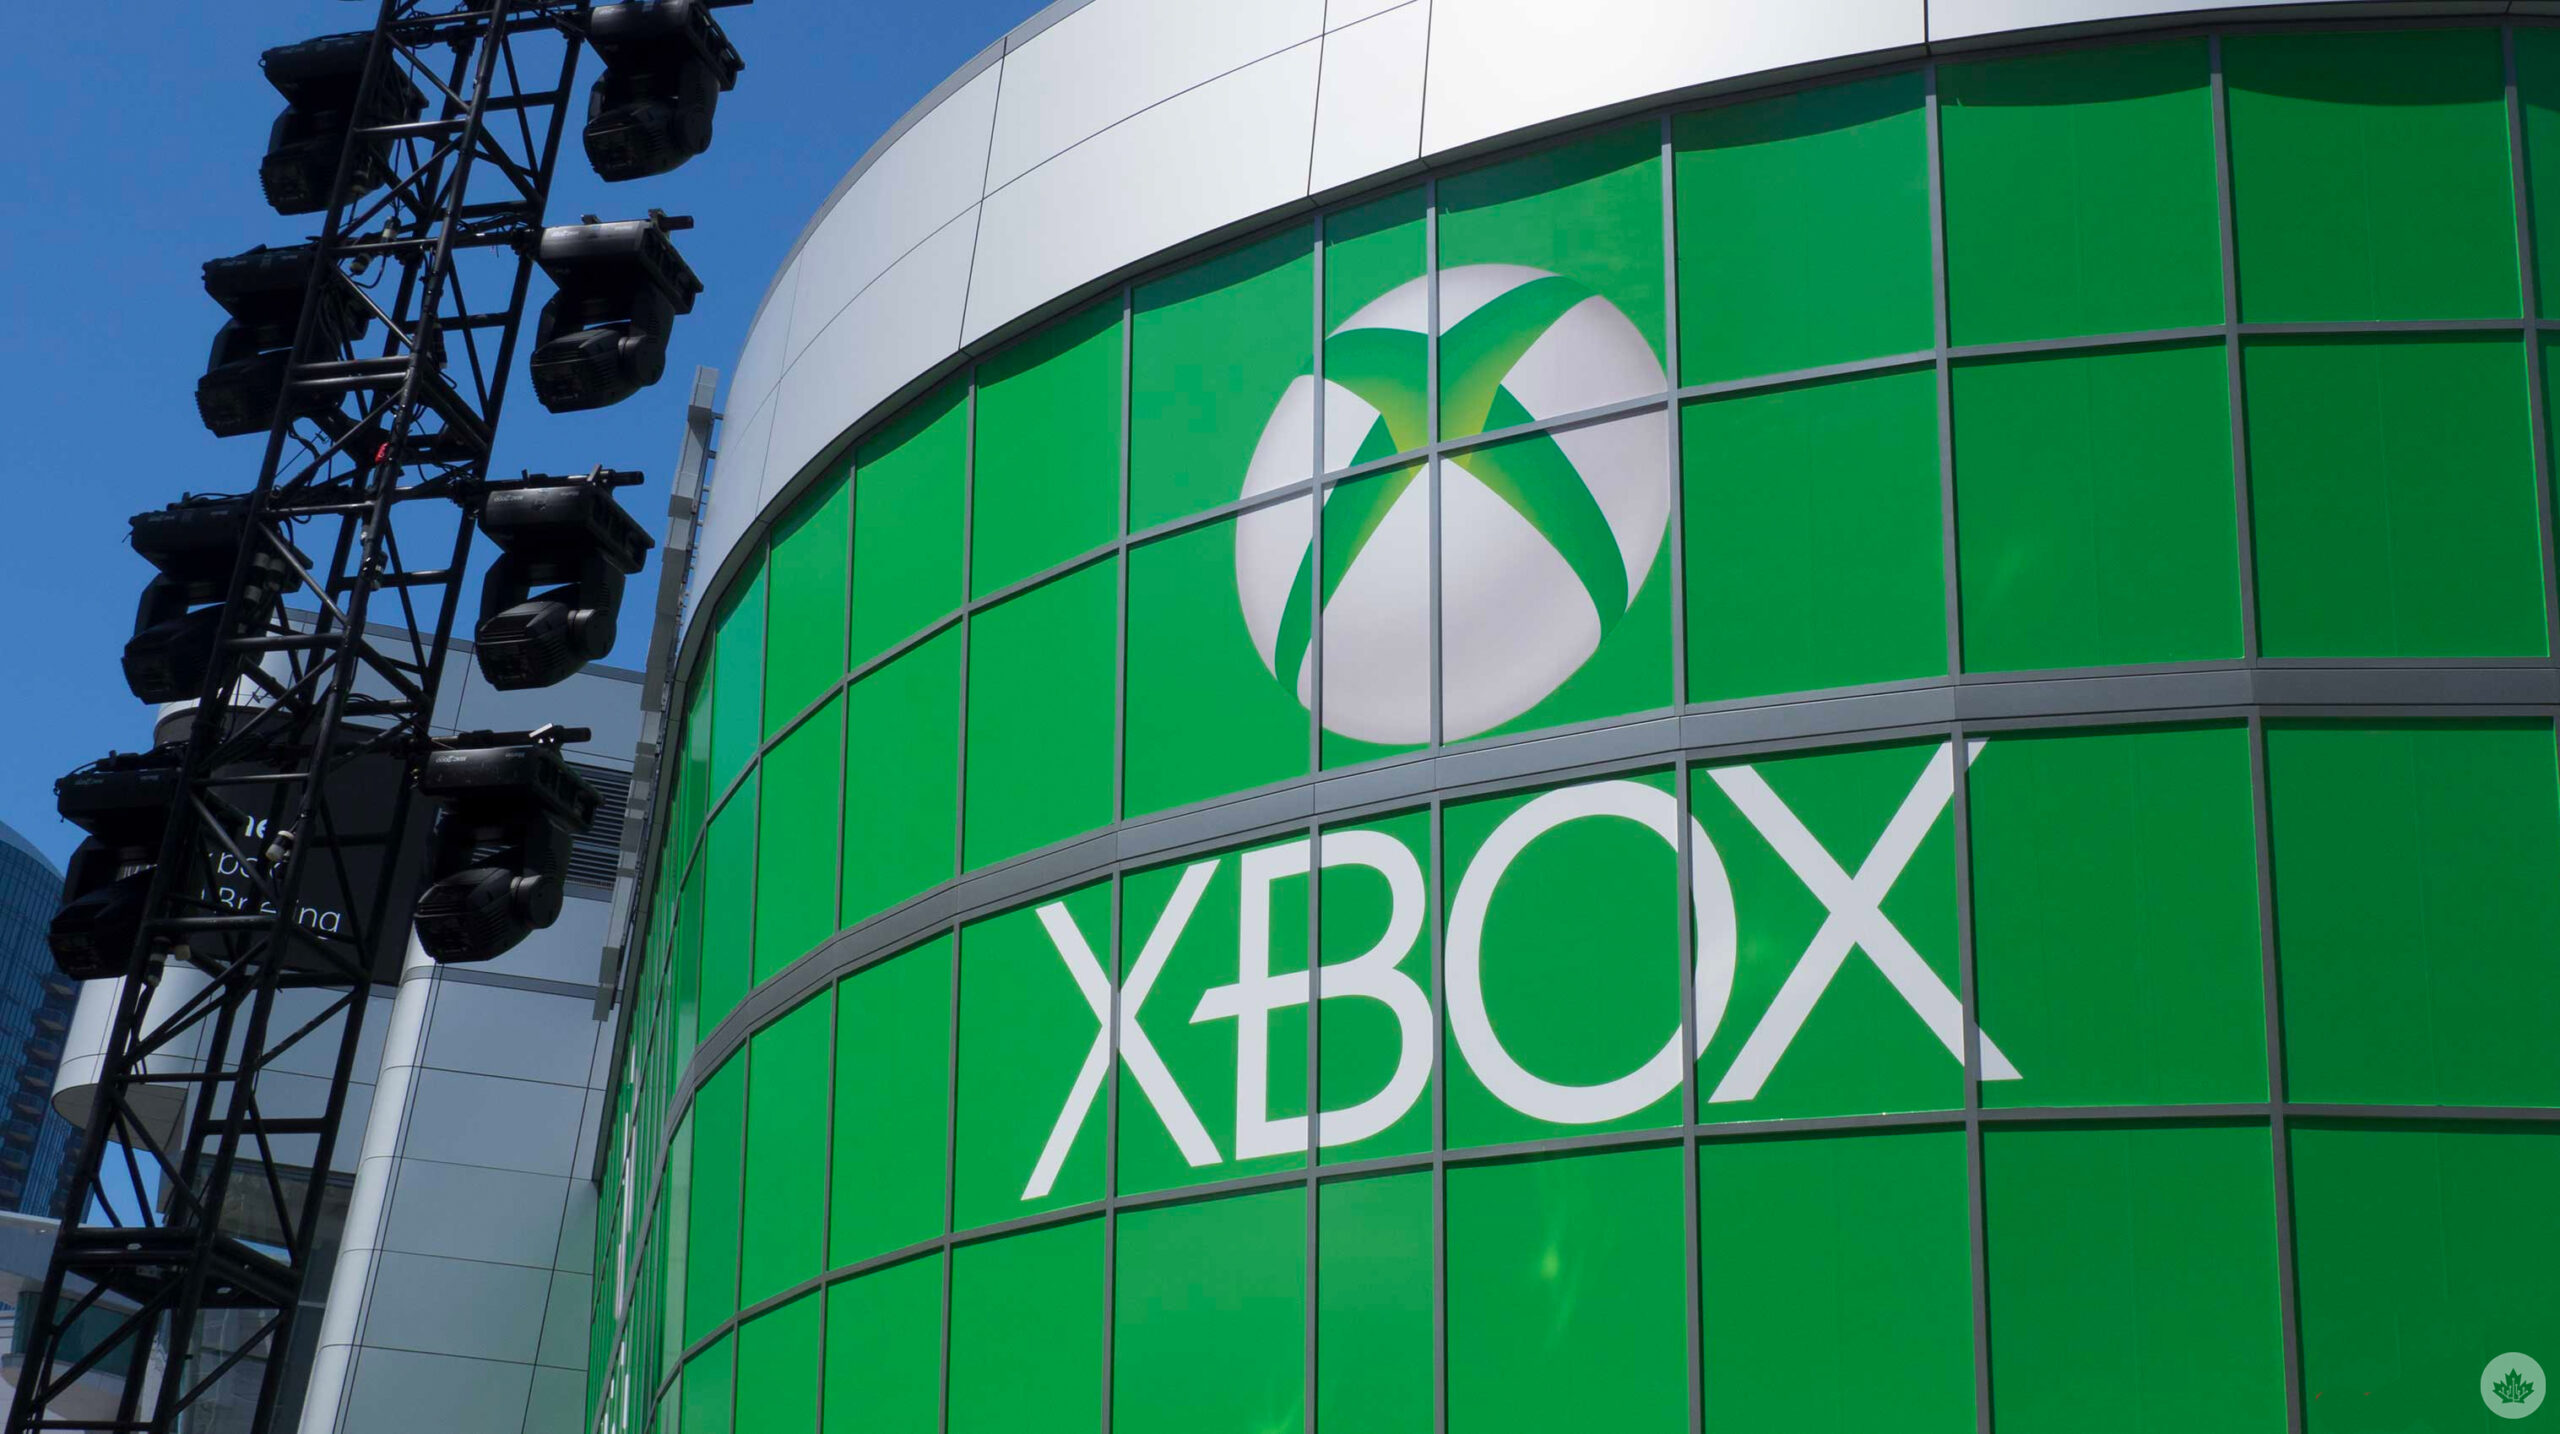 Microsoft's shutdown of Xbox 360 storefront is another blow to